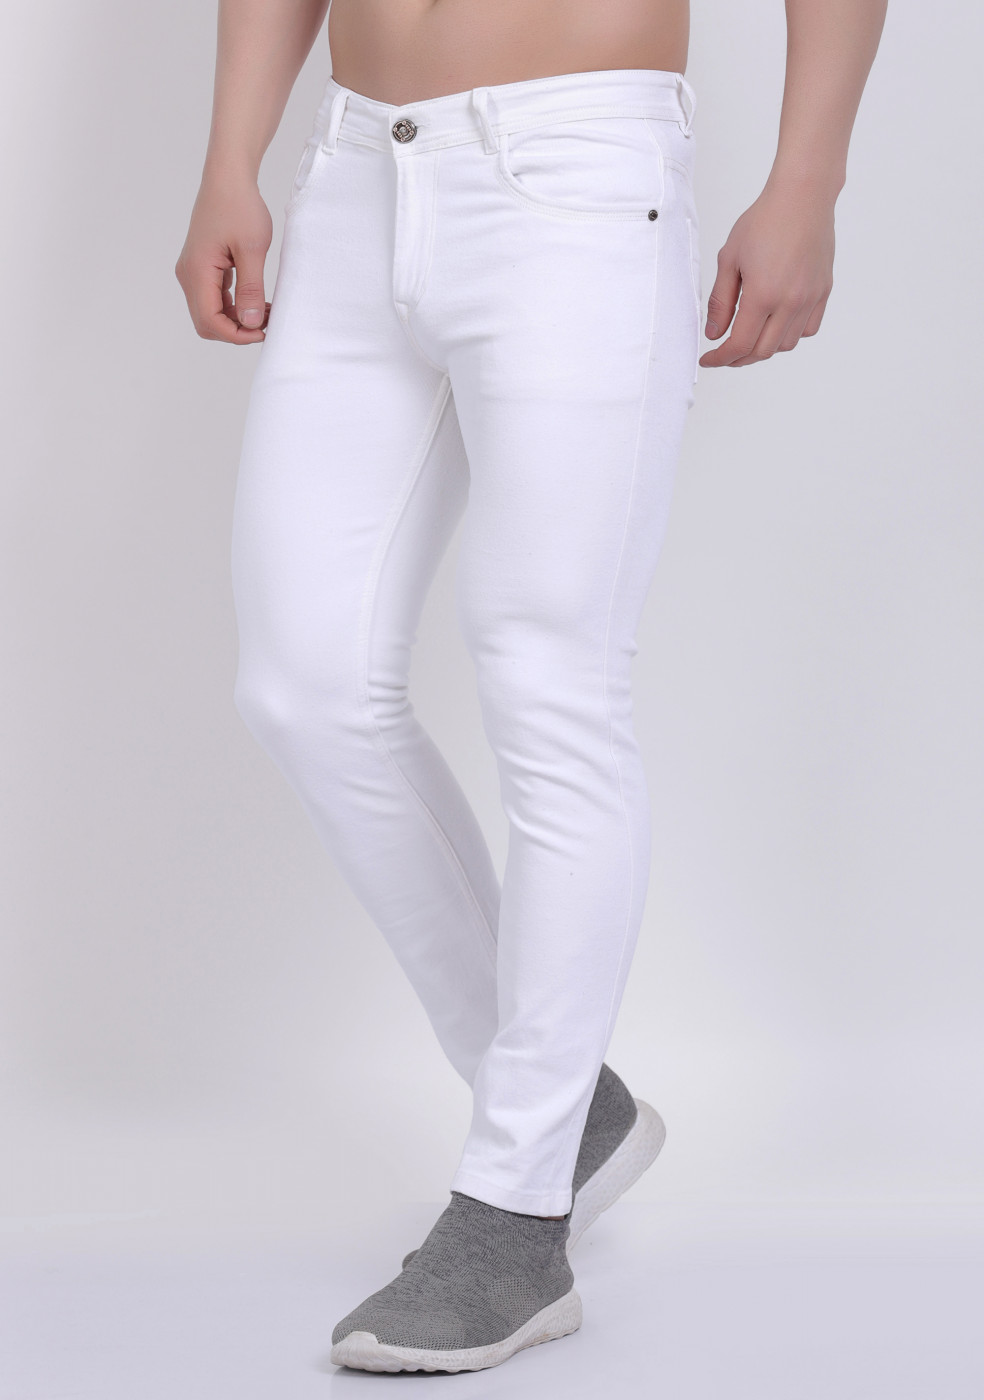 White Stretchable Cotton Jeans For Men